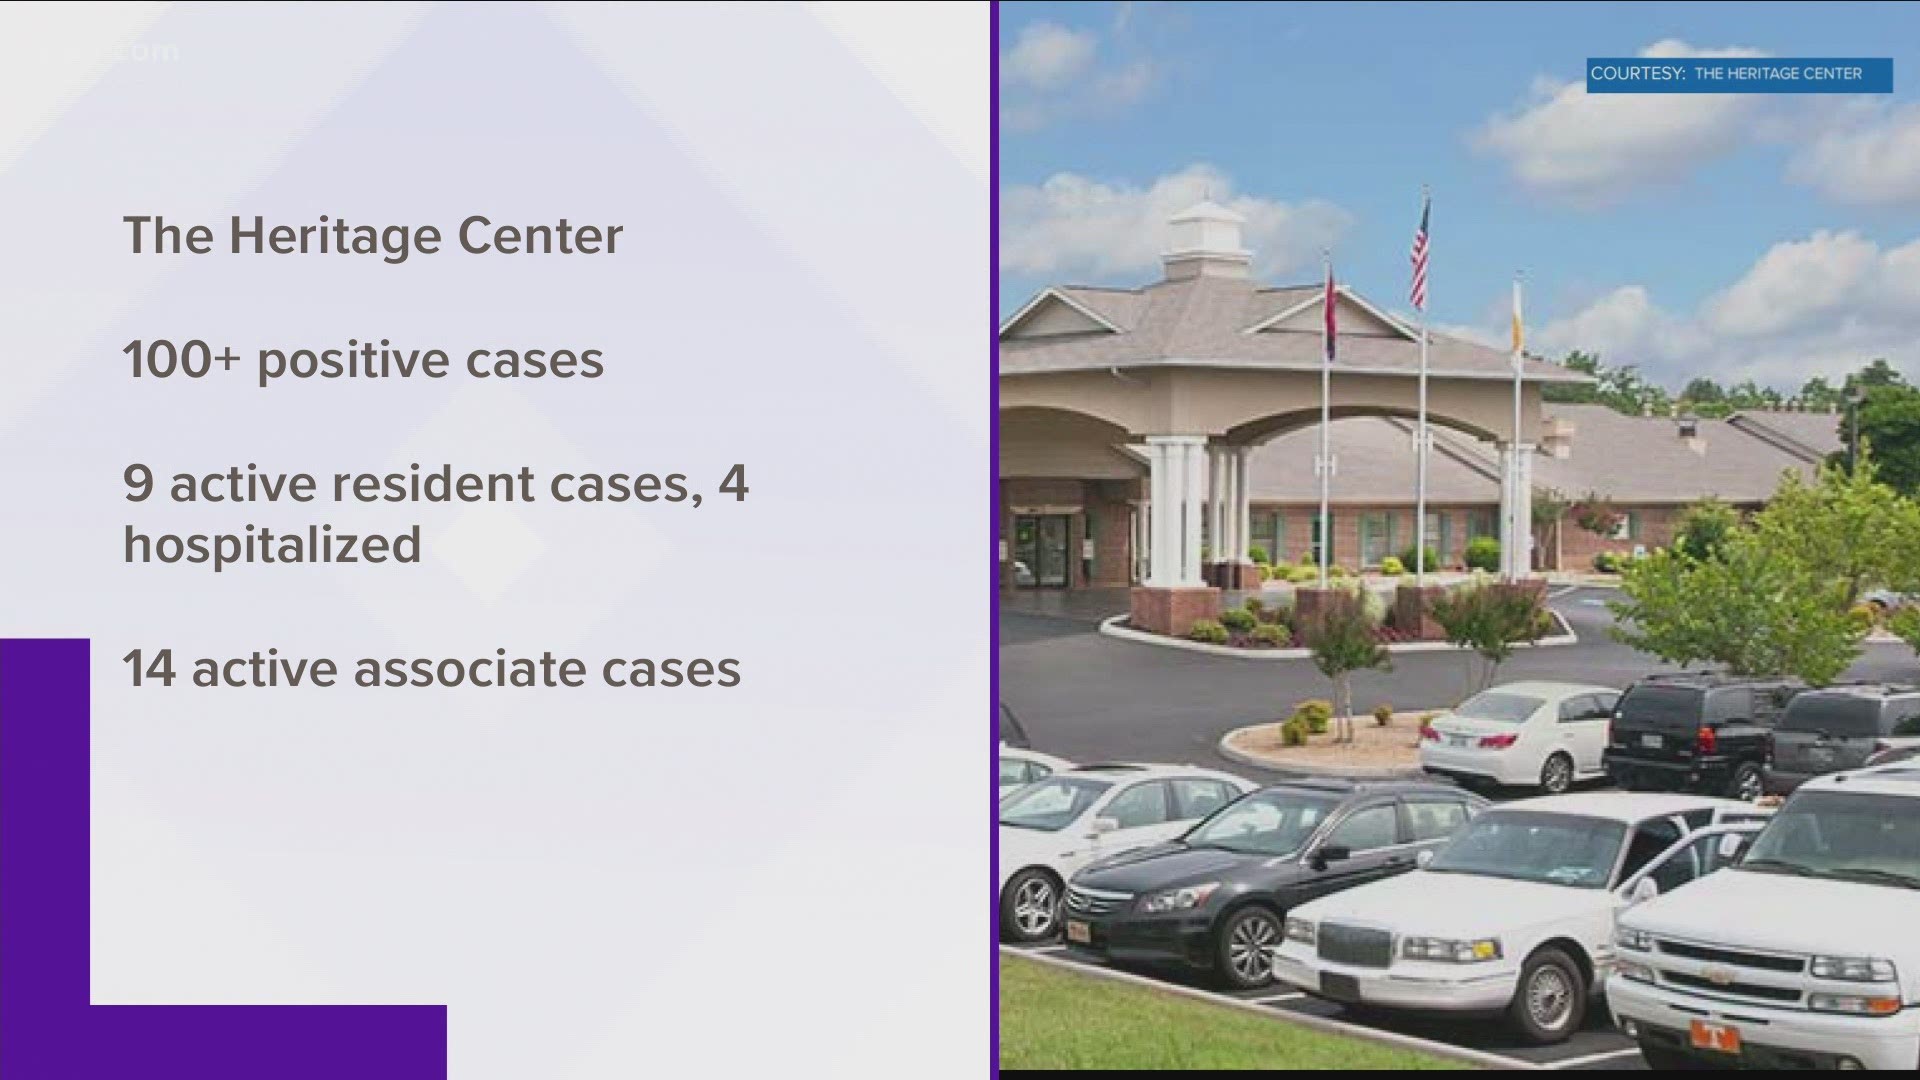 "The Heritage Center" in Morristown reported that 14 residents have died due to the coronavirus.